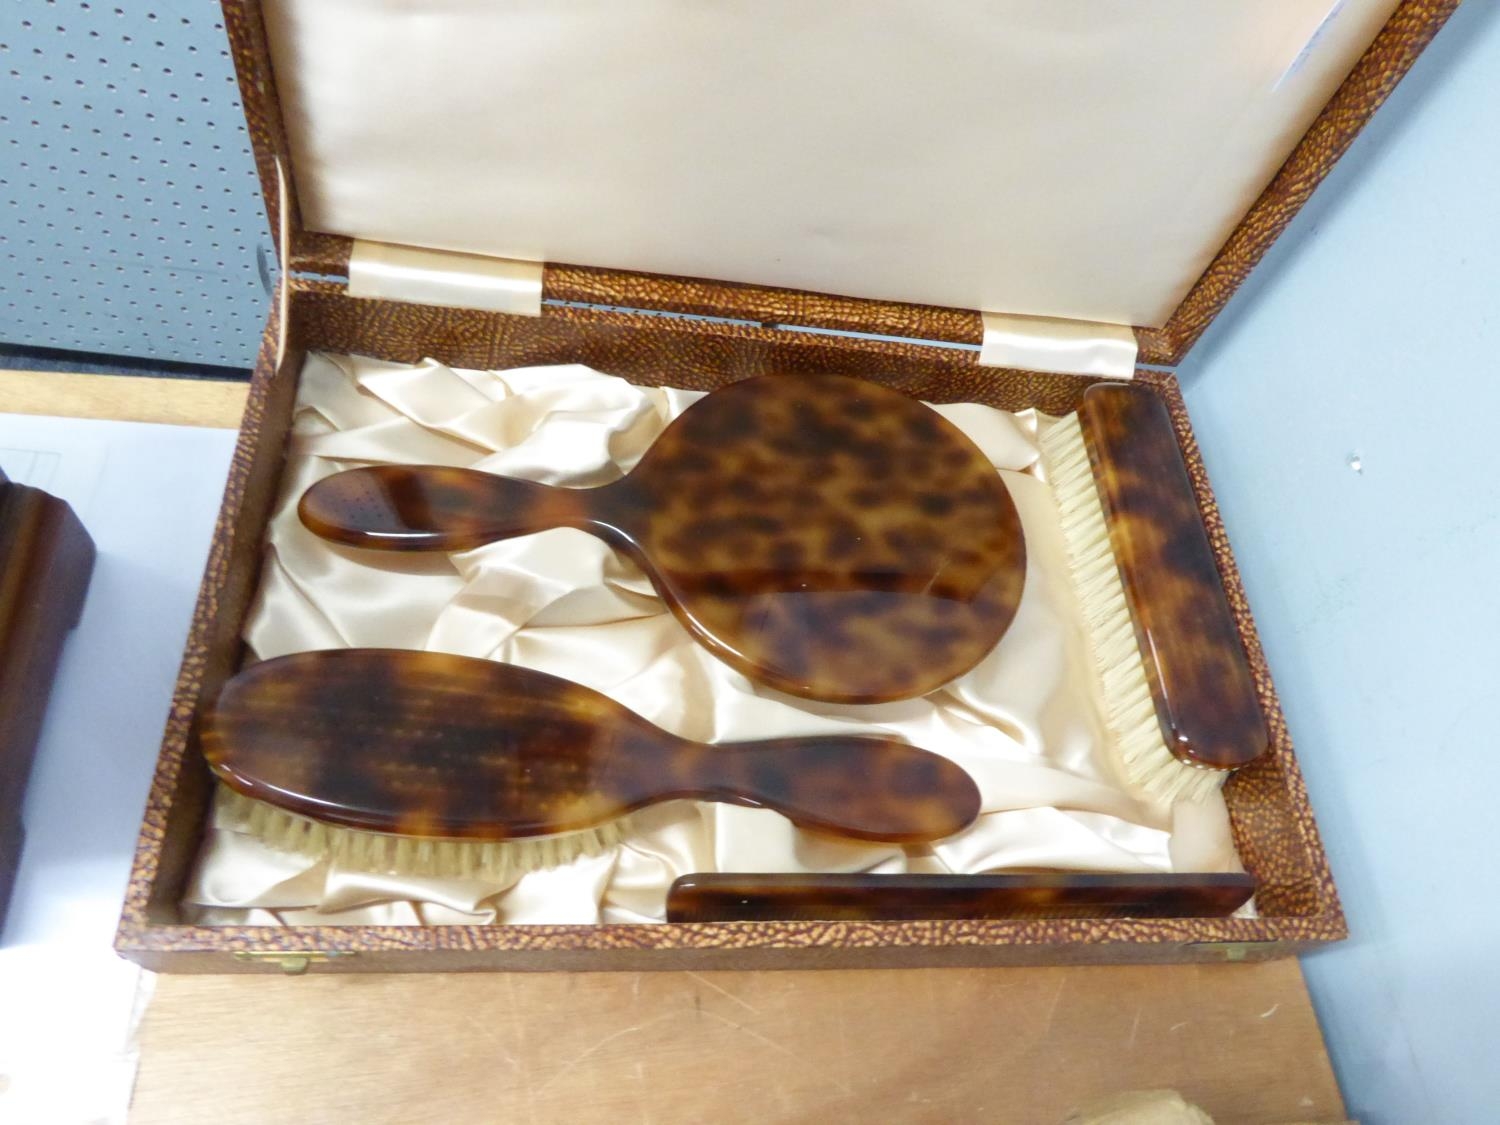 LADY'S SIMULATED TORTOISESHELL DRESSING TABLE BRUSH SET OF 4 PIECES, IN FITTED CASE VIZ HAND MIRROR,